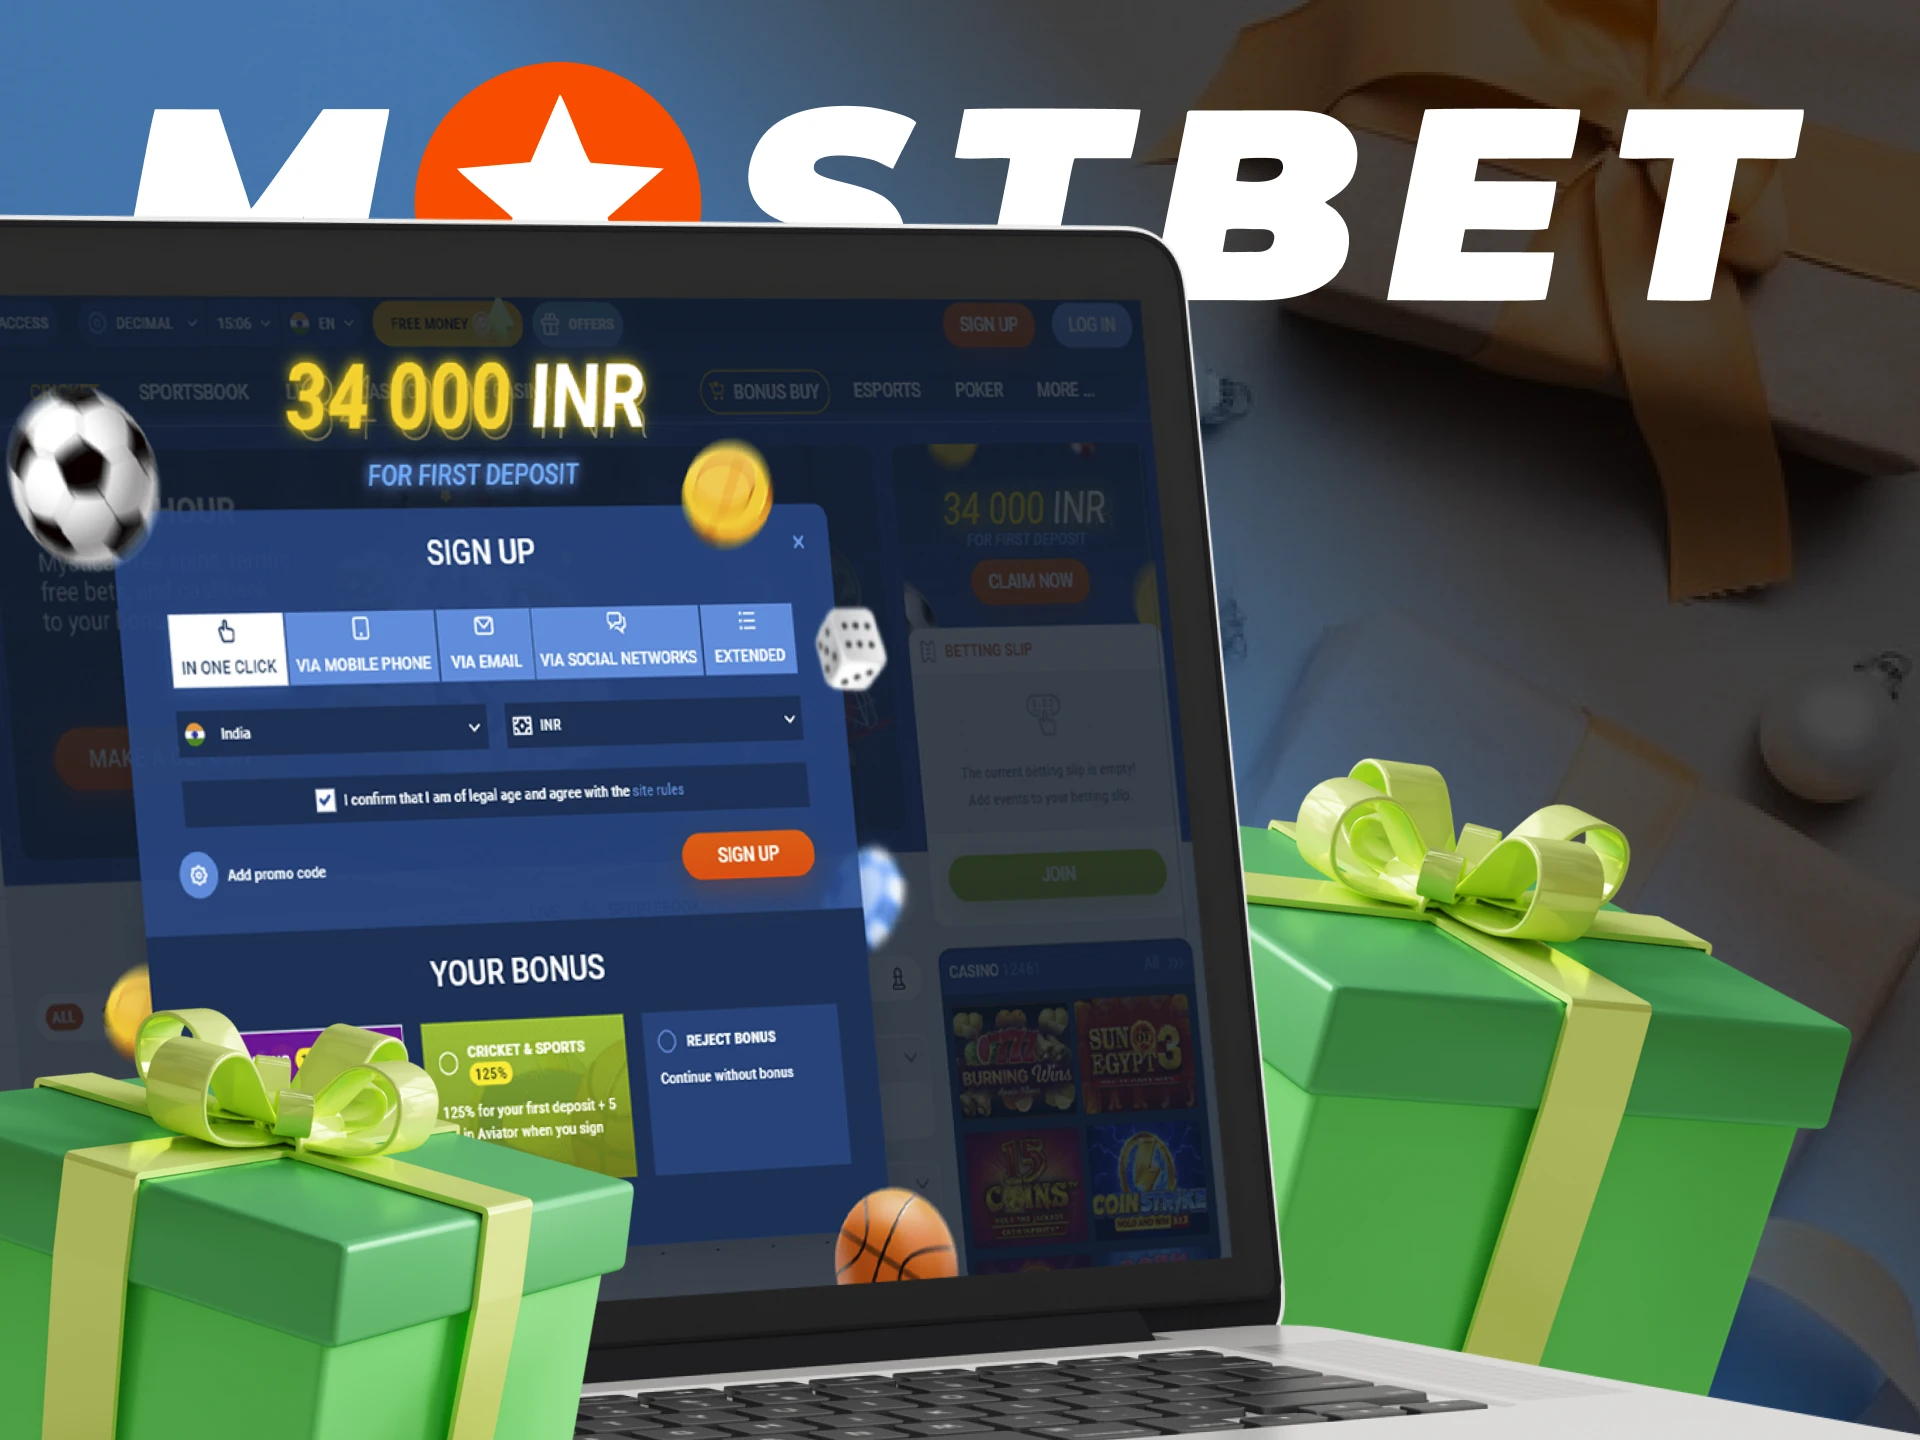 You need to create an account on the Mostbet if you want to get the welcome bonus.